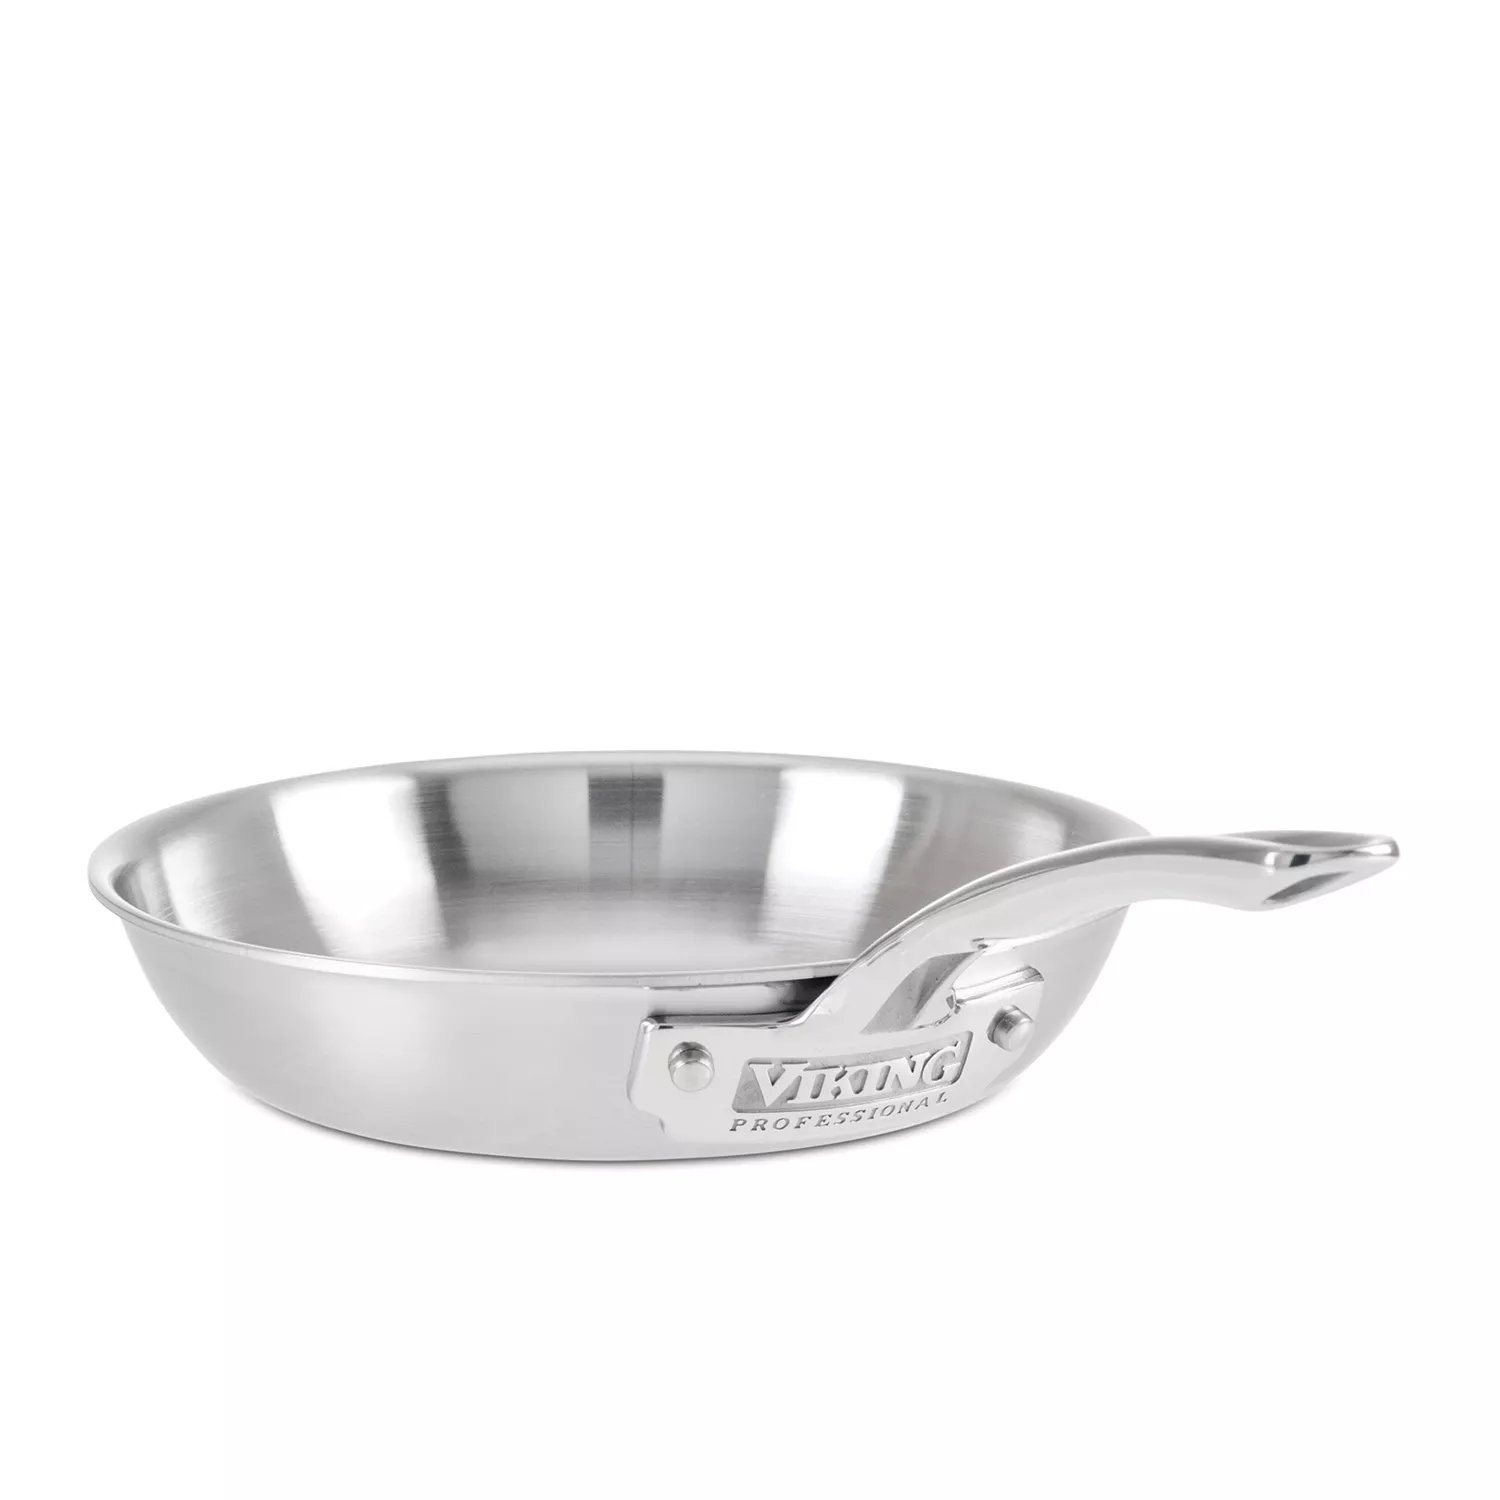 Photos - Pan VIKING Professional 5-Ply Stainless Steel Skillet 4015-1018S 